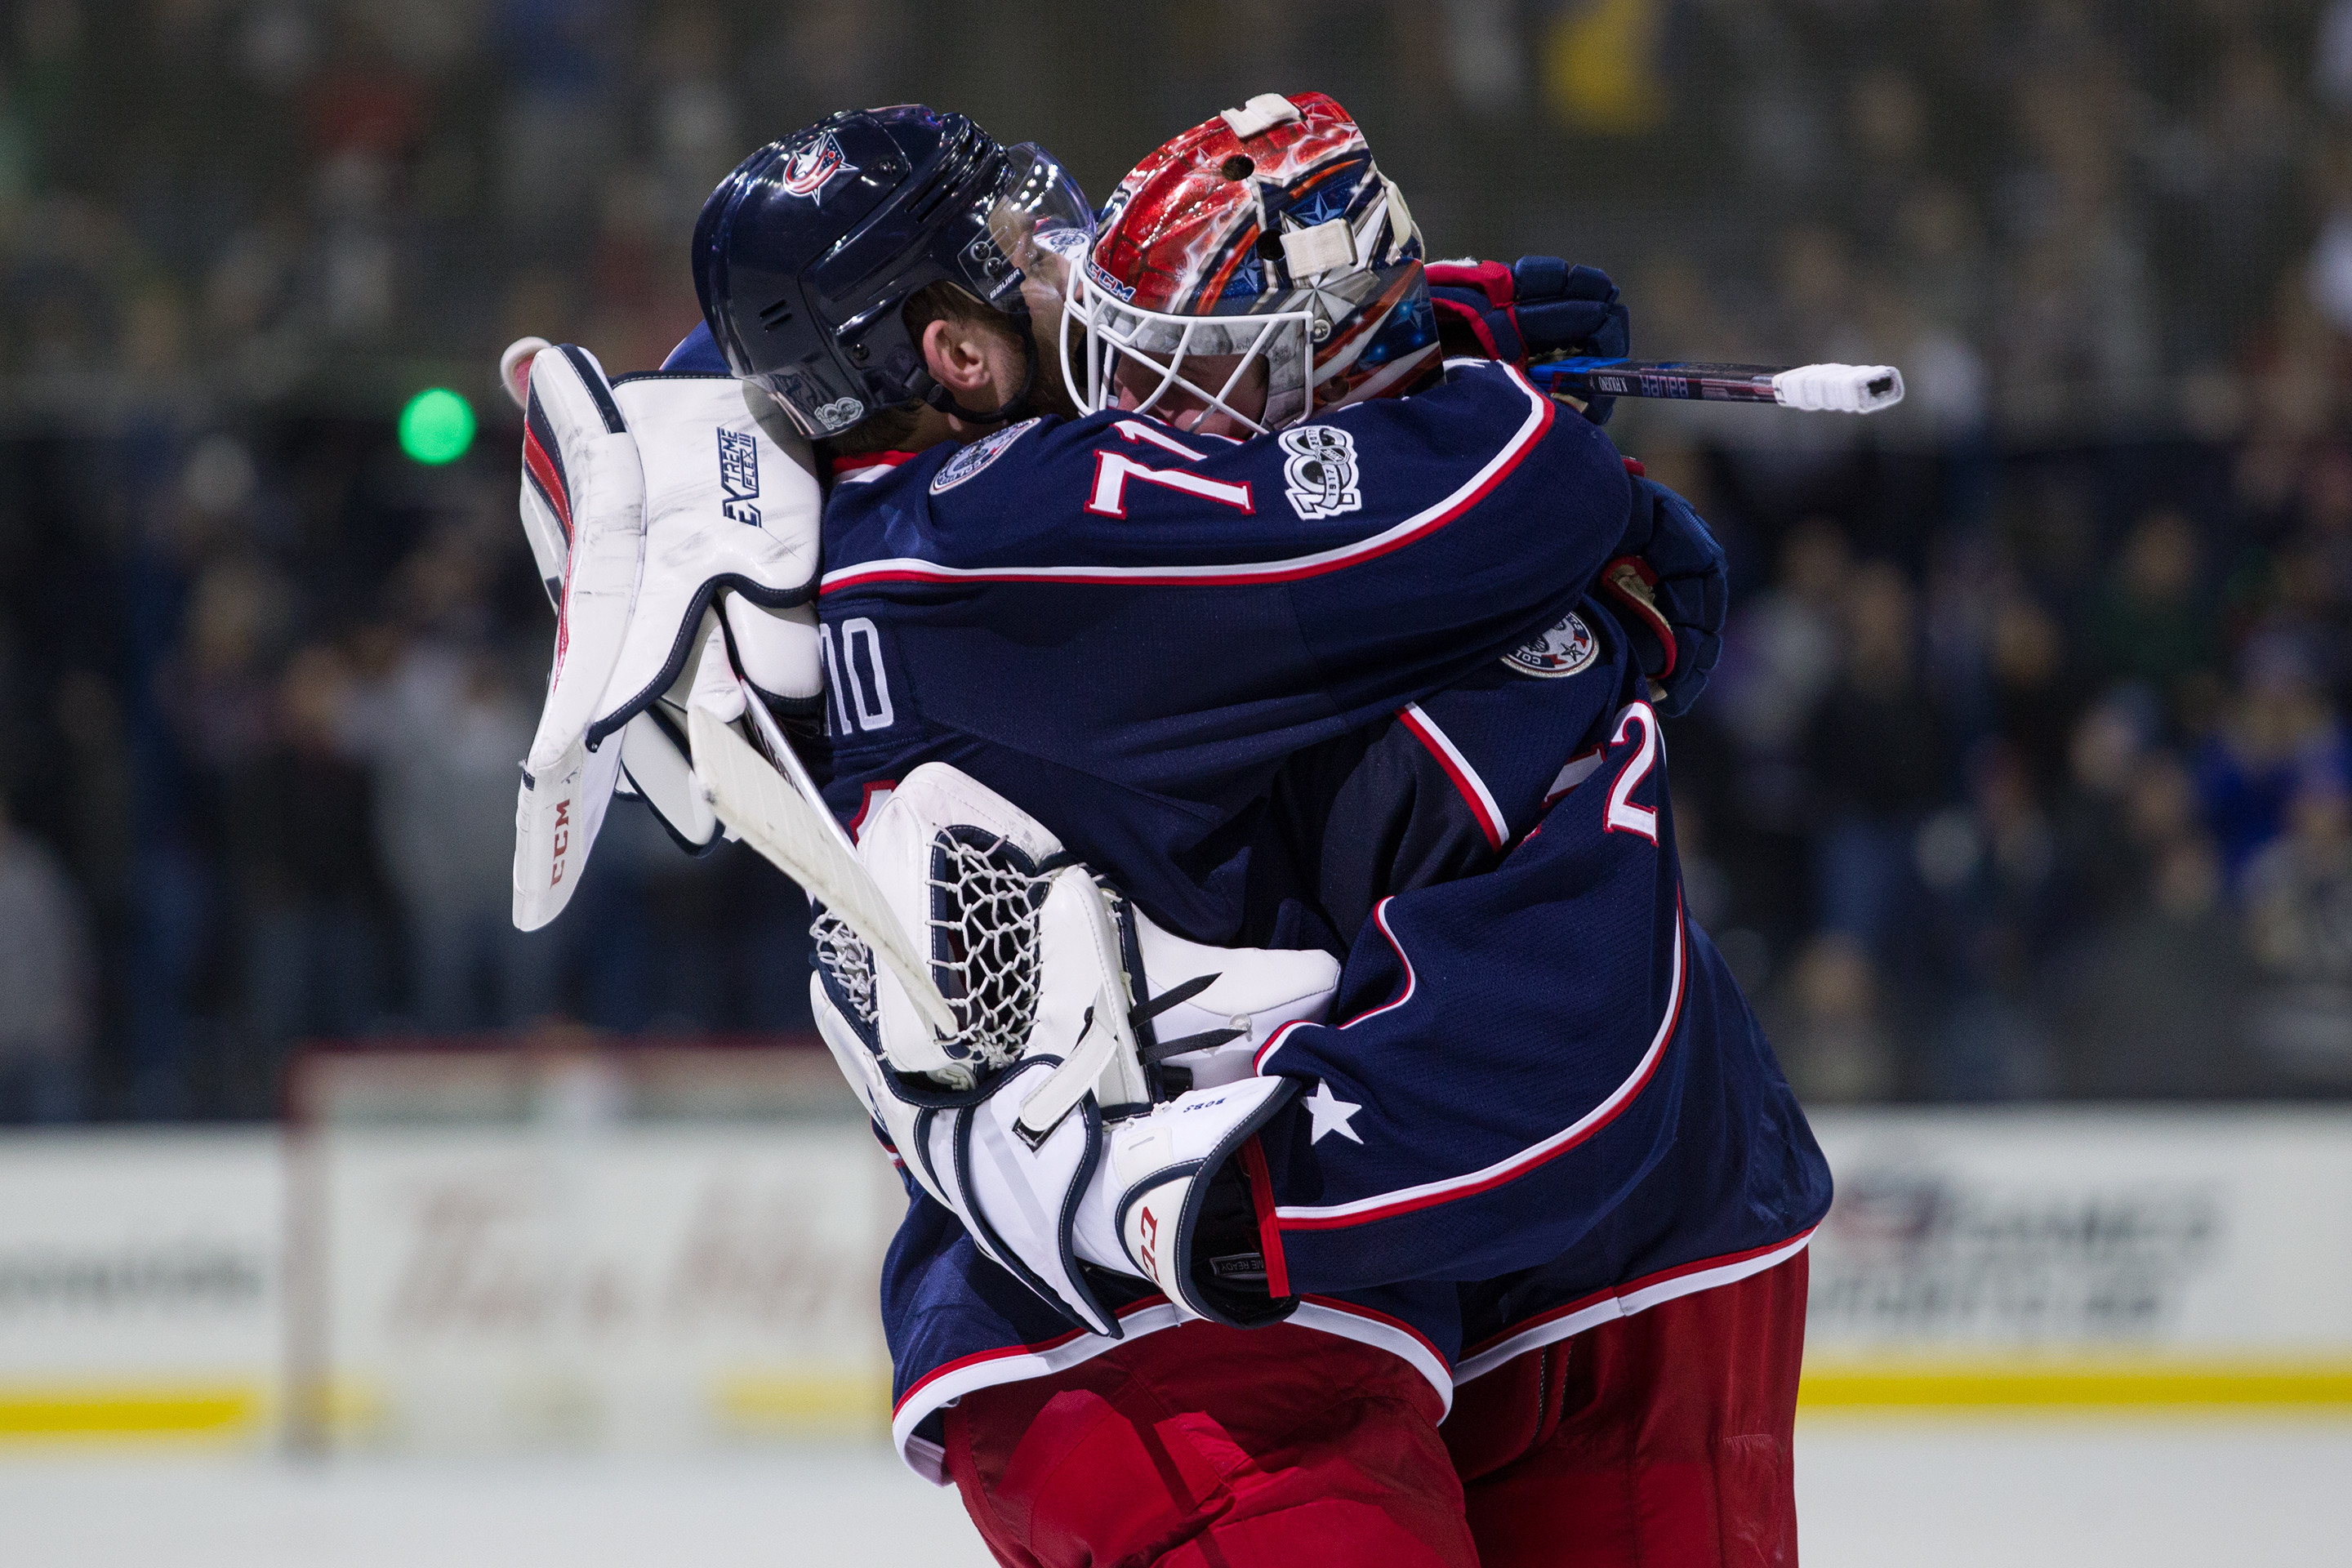 Sports in Brief: Blue Jackets sign Bobrovsky for two more years